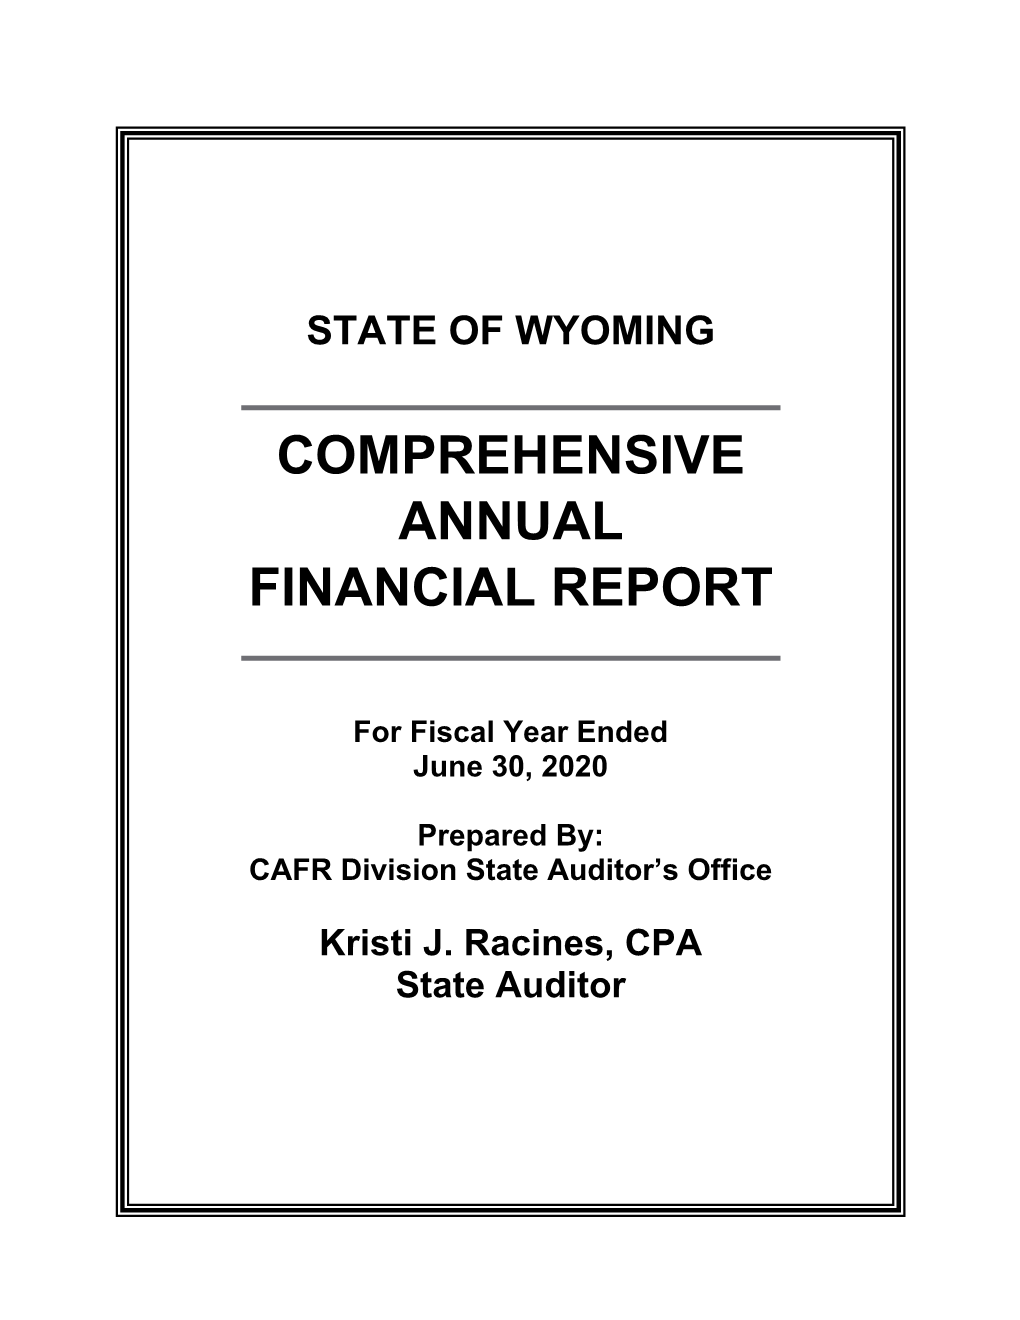 Current Comprehensive Annual Financial